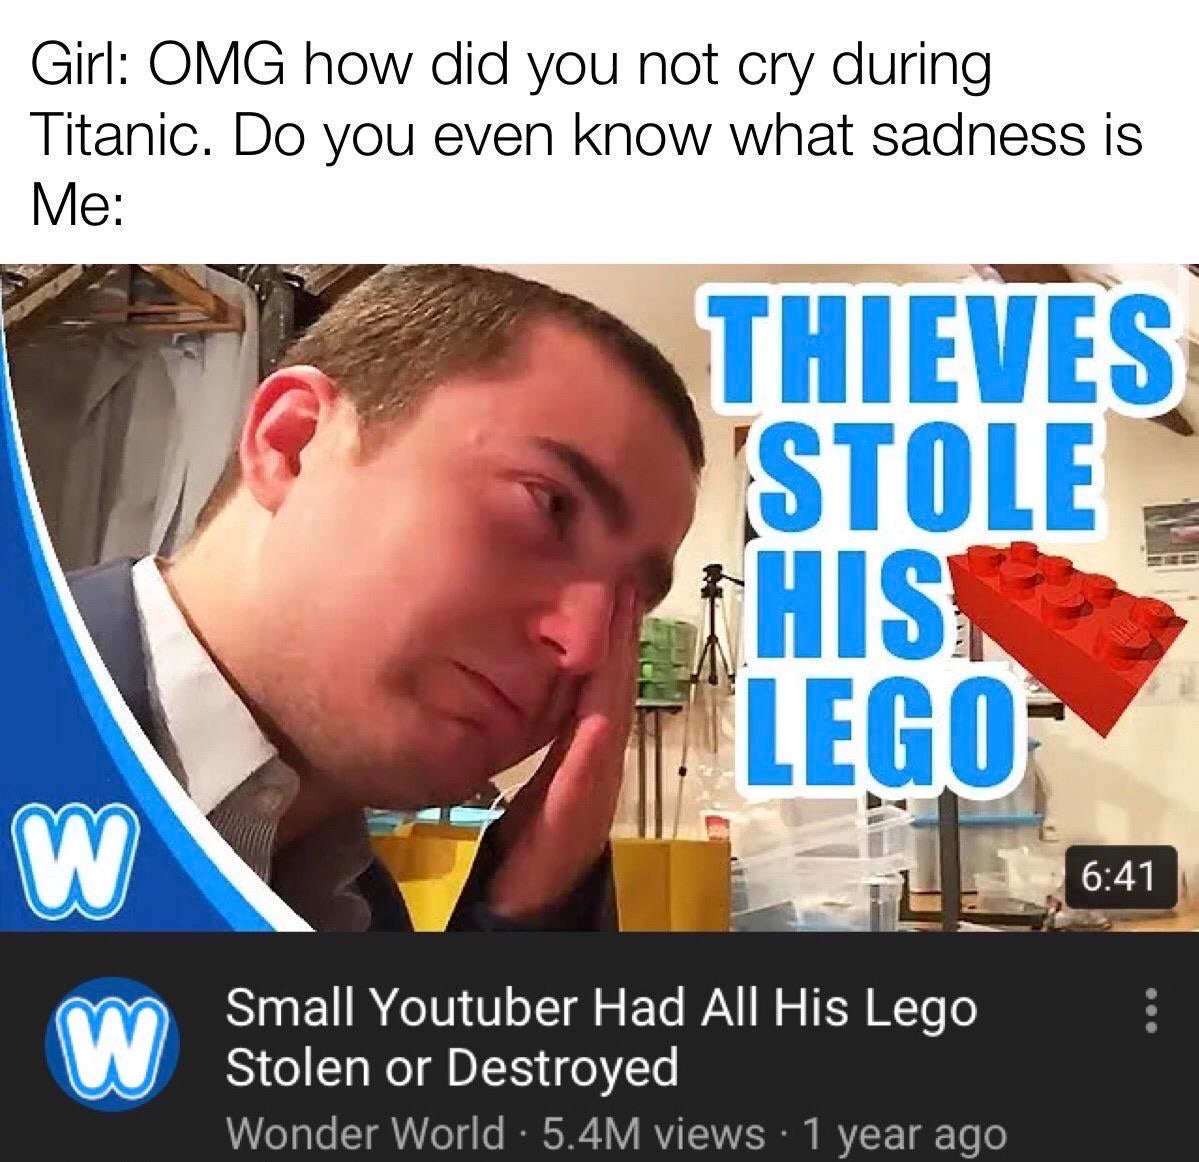 photo caption - Girl Omg how did you not cry during Titanic. Do you even know what sadness is Me Thieves Stole Hisn Lego W Small Youtuber Had All His Lego W Stolen or Destroyed Wonder World 5.4M views 1 year ago